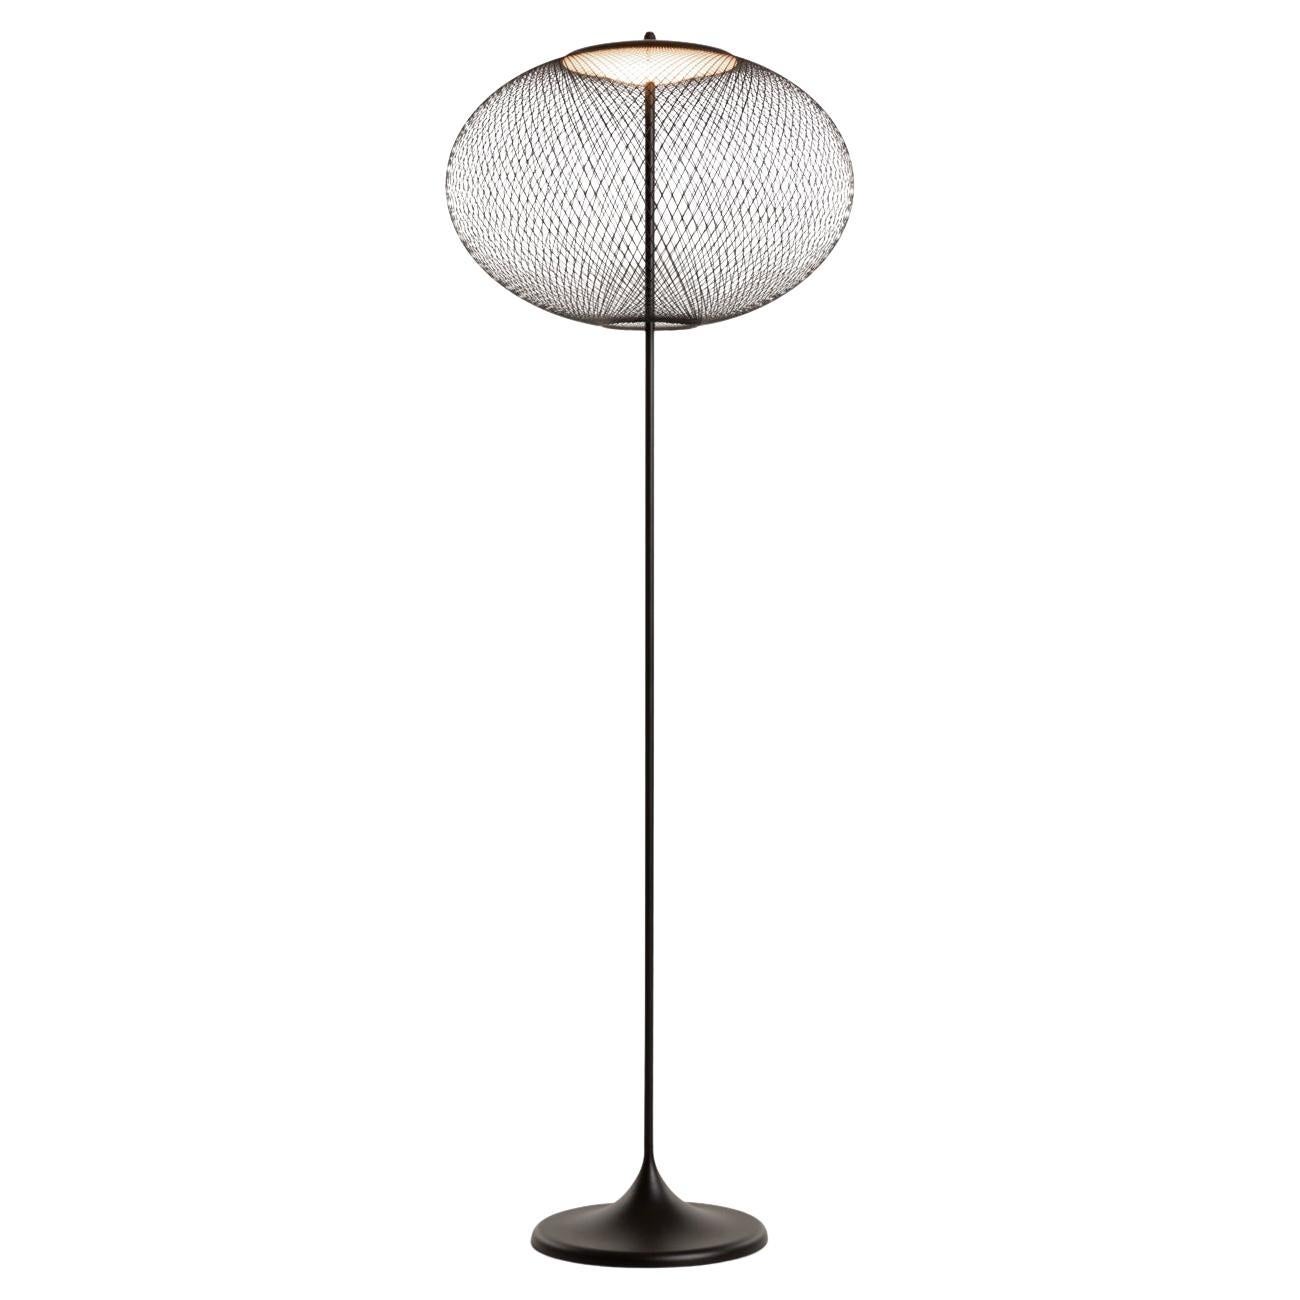 Moooi NR2 Black LED Floor Lamp with Powder Coated Steel Stand by Bertjan Pot